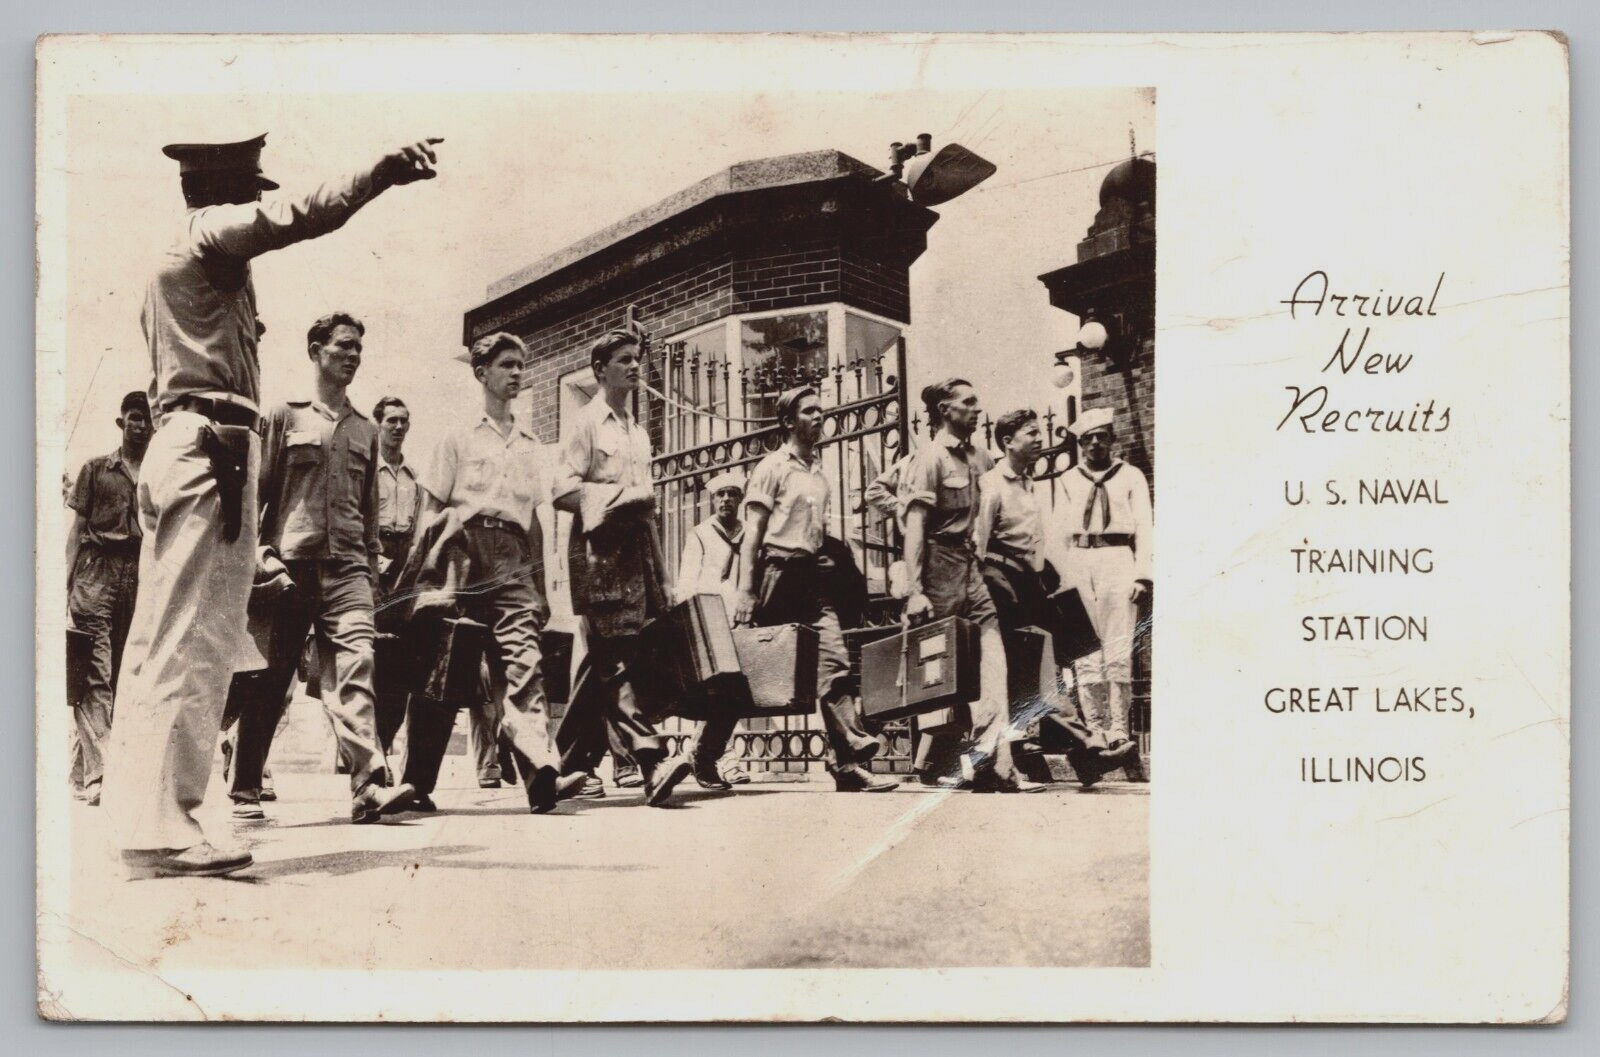 New Recruits Arrive US Naval Training Station Great Lakes IL Postcard RPPC c1943